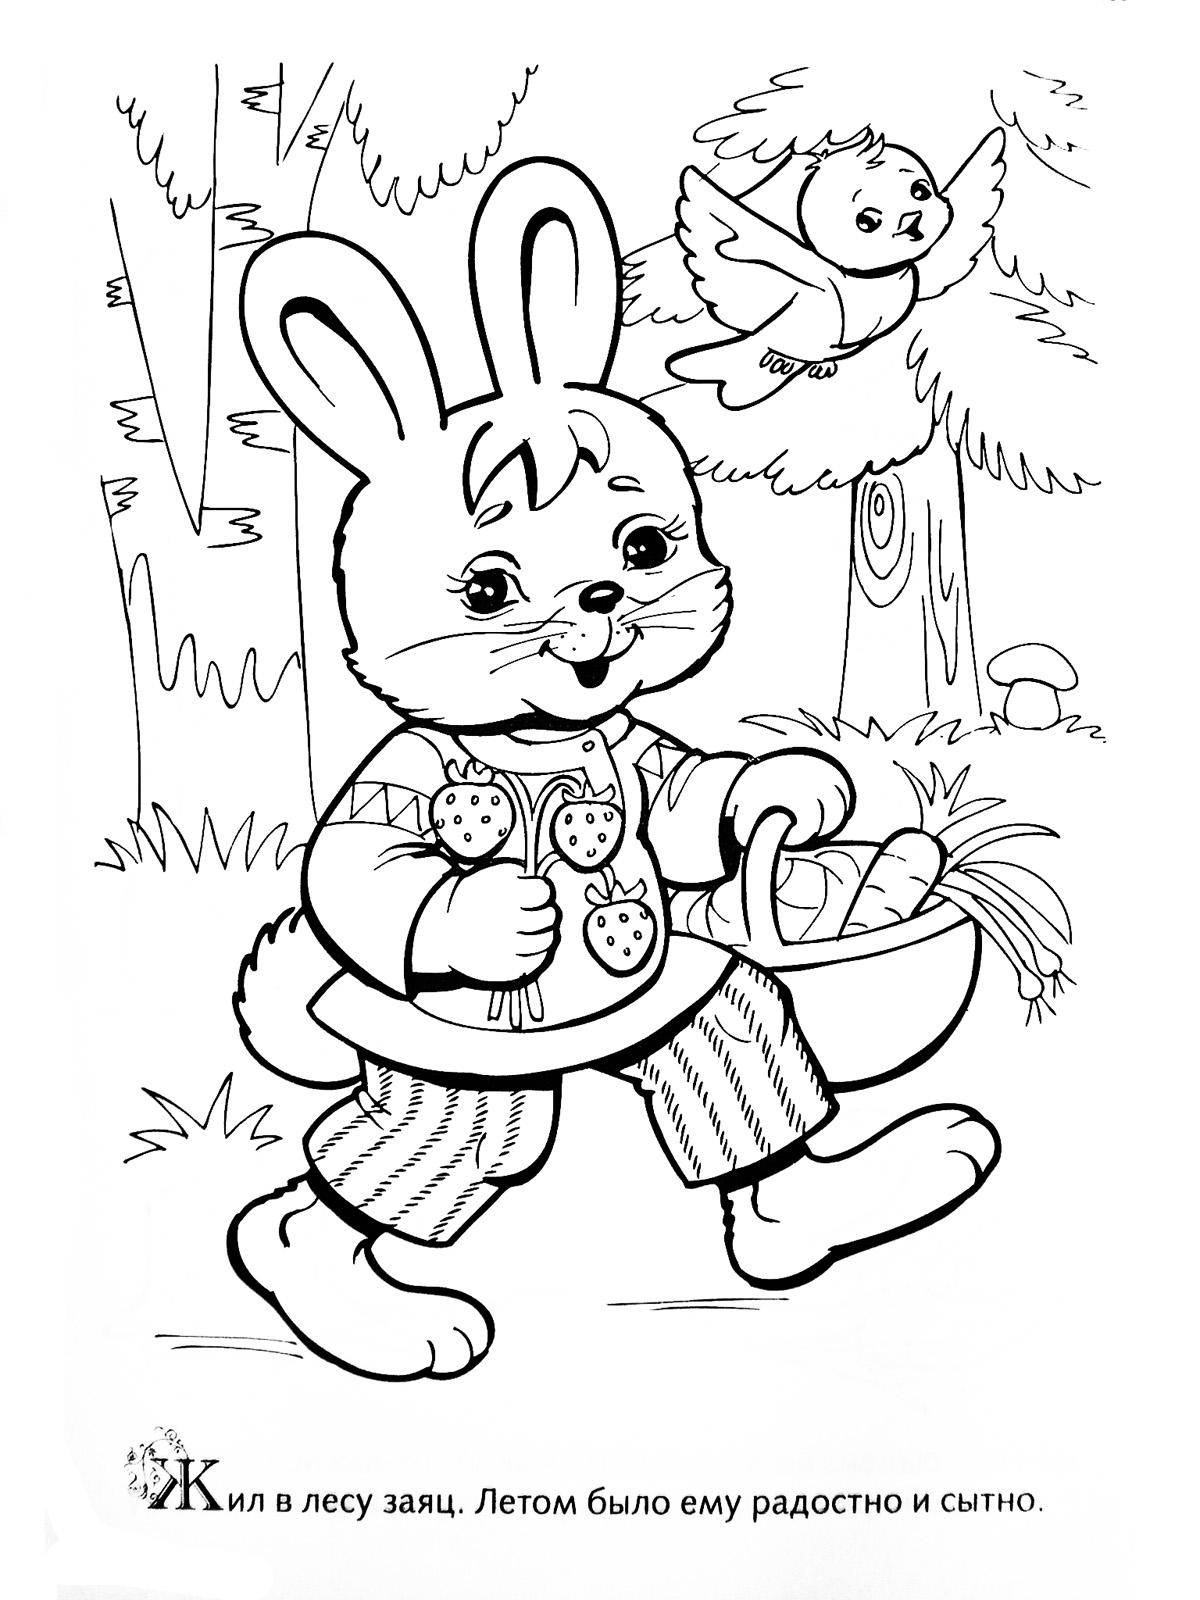 Coloring Figure of a hare with fruits and vegetables in the forest. Category Pets allowed. Tags:  hare, rabbit.